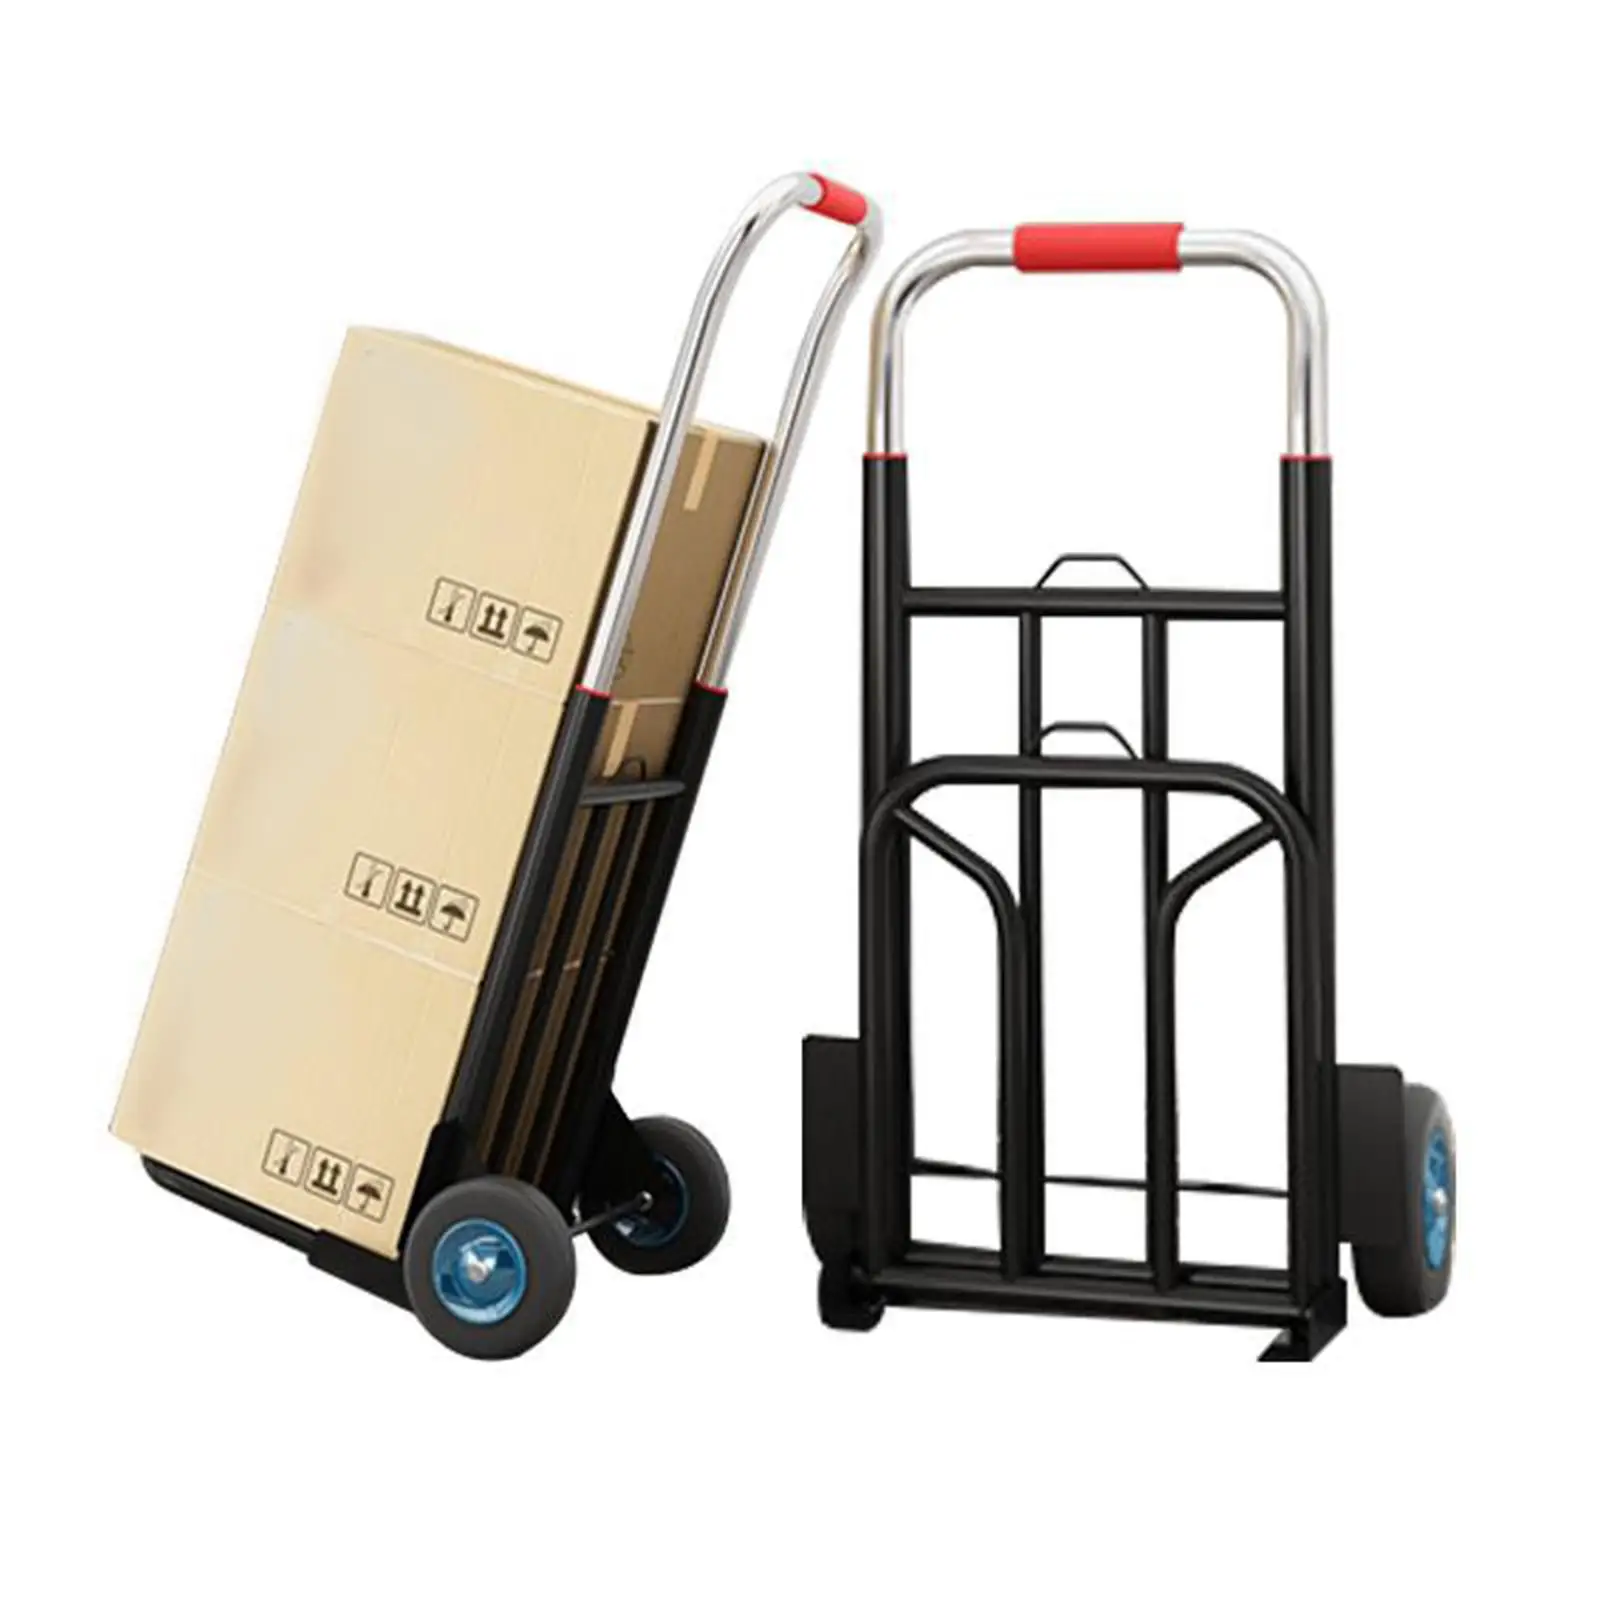 Folding Hand Truck Luggage Trolley Cart Shopping Cart with 2 Wheels Adjustable Handle for Daily Use Convenient Smooth Rolling